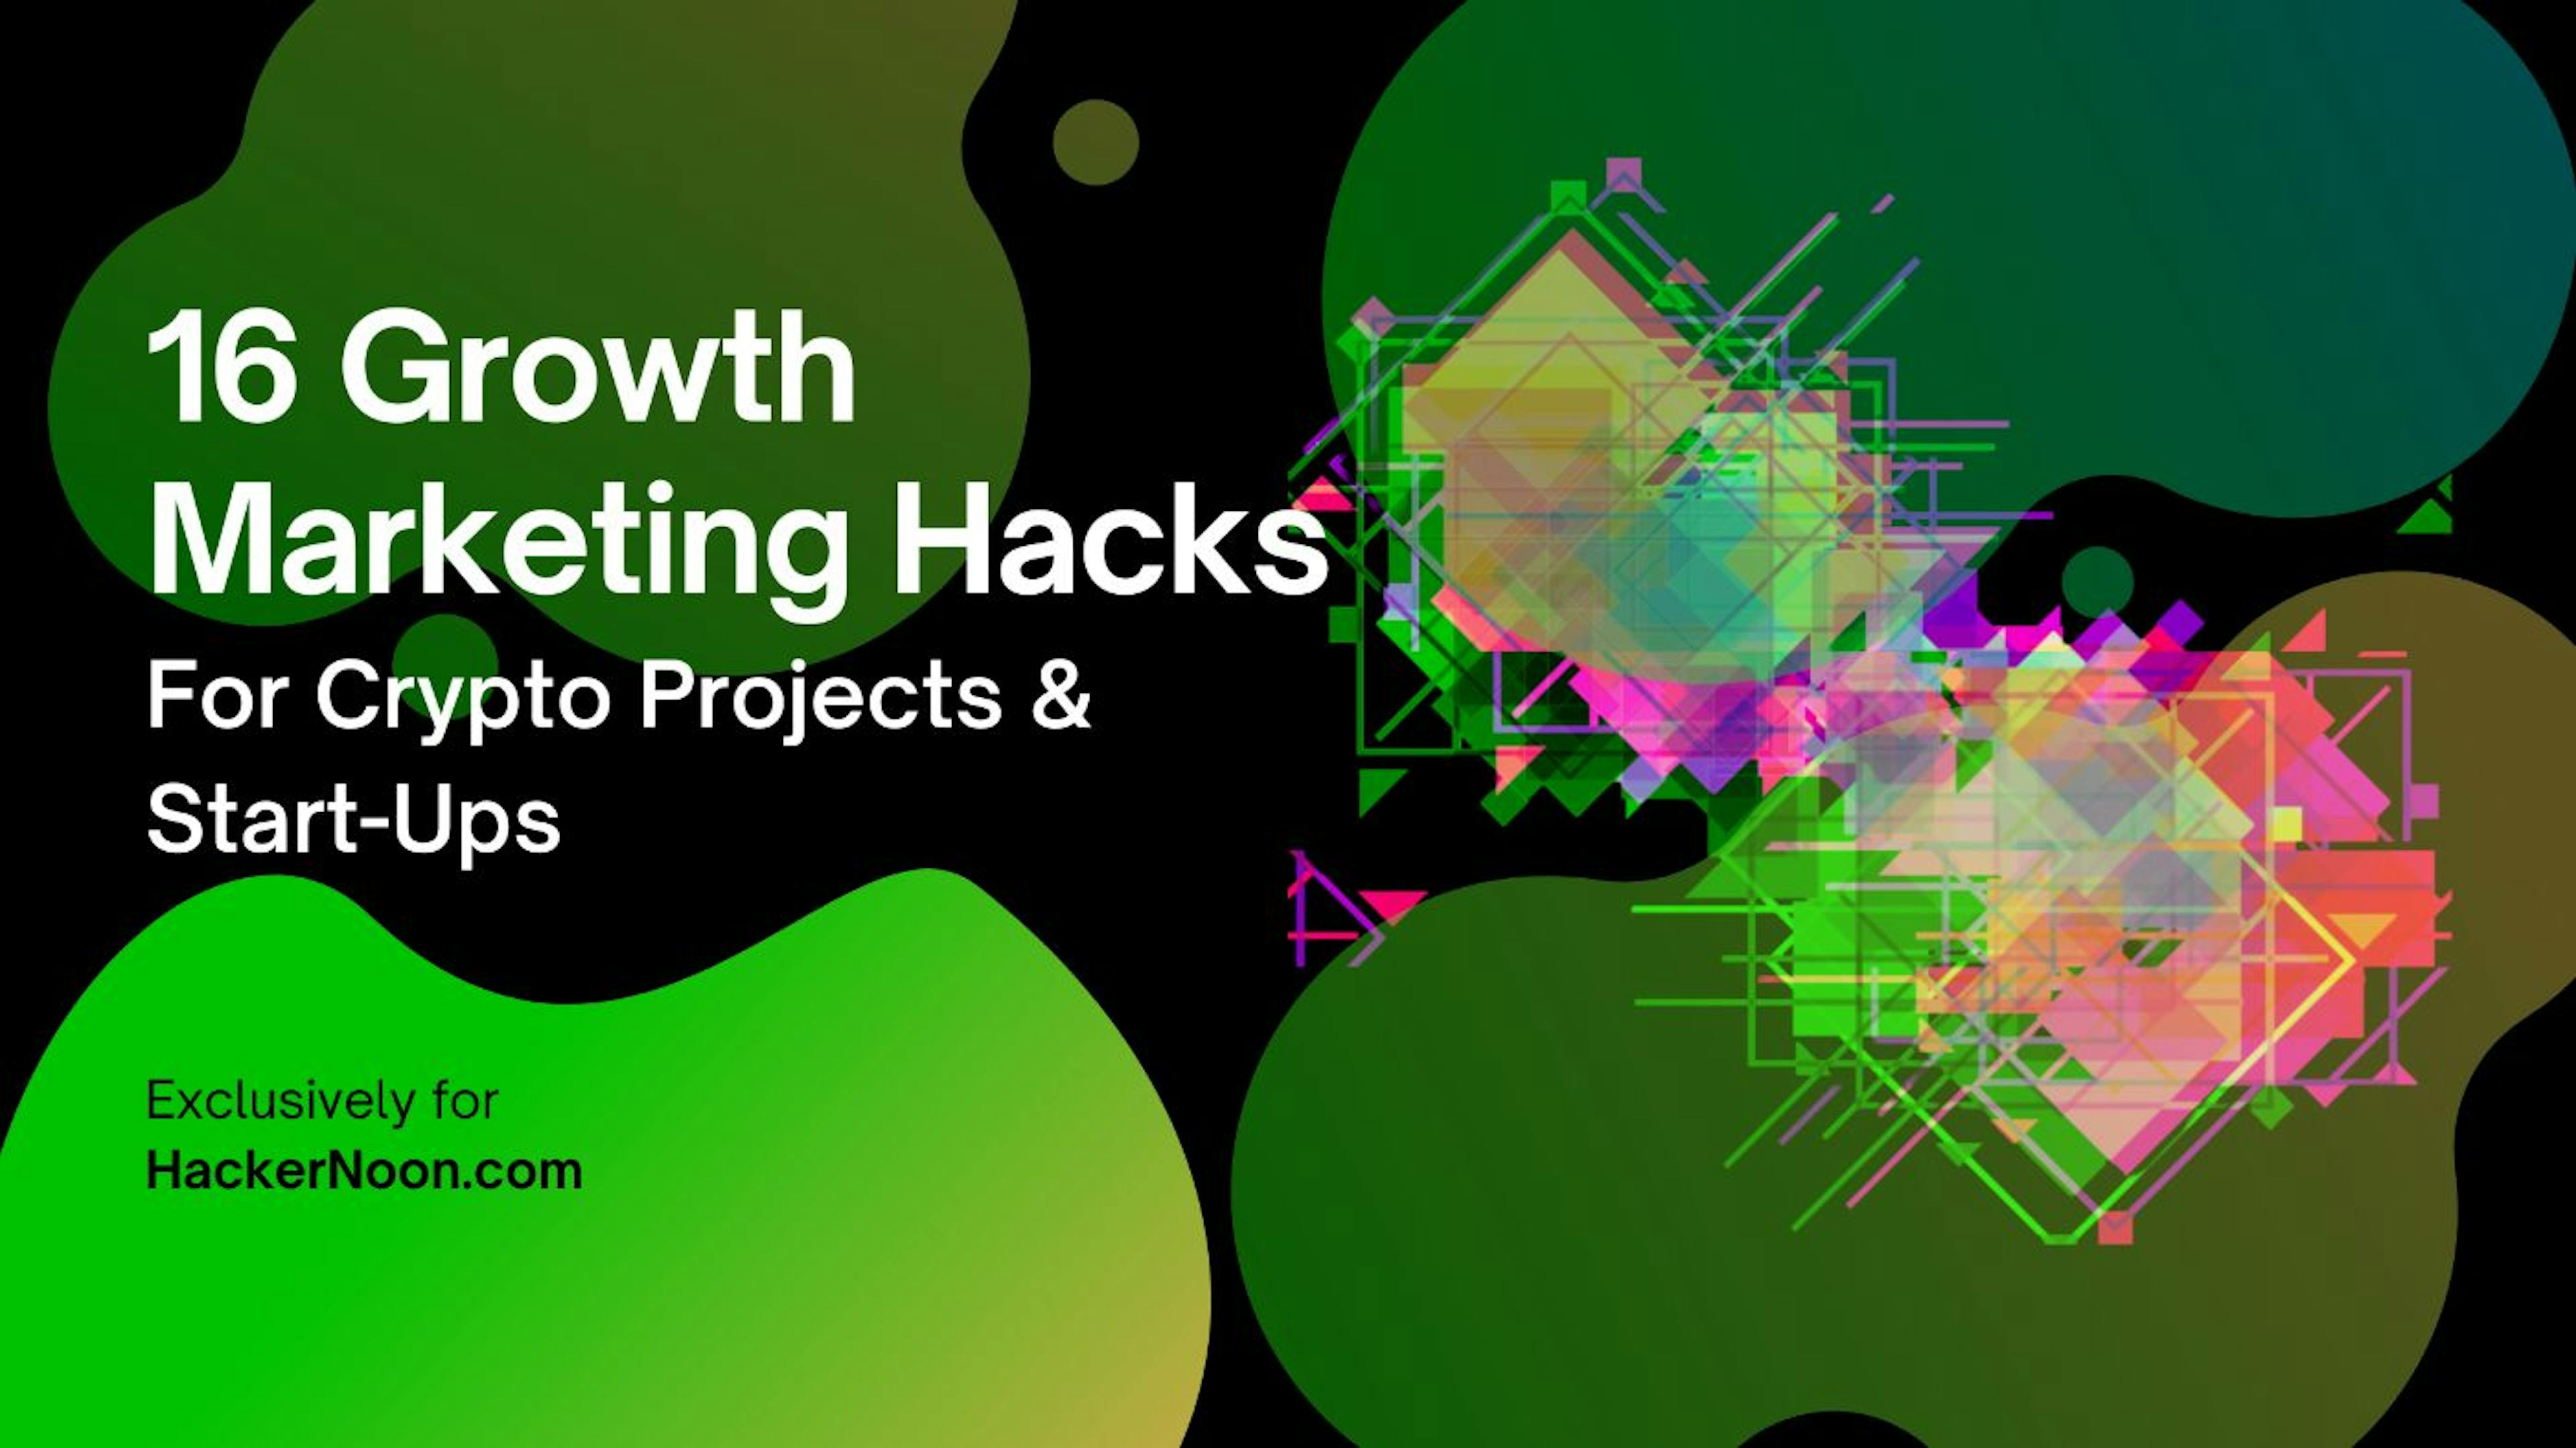 featured image - 16 Growth Marketing Hacks For Crypto Projects & Start-Ups